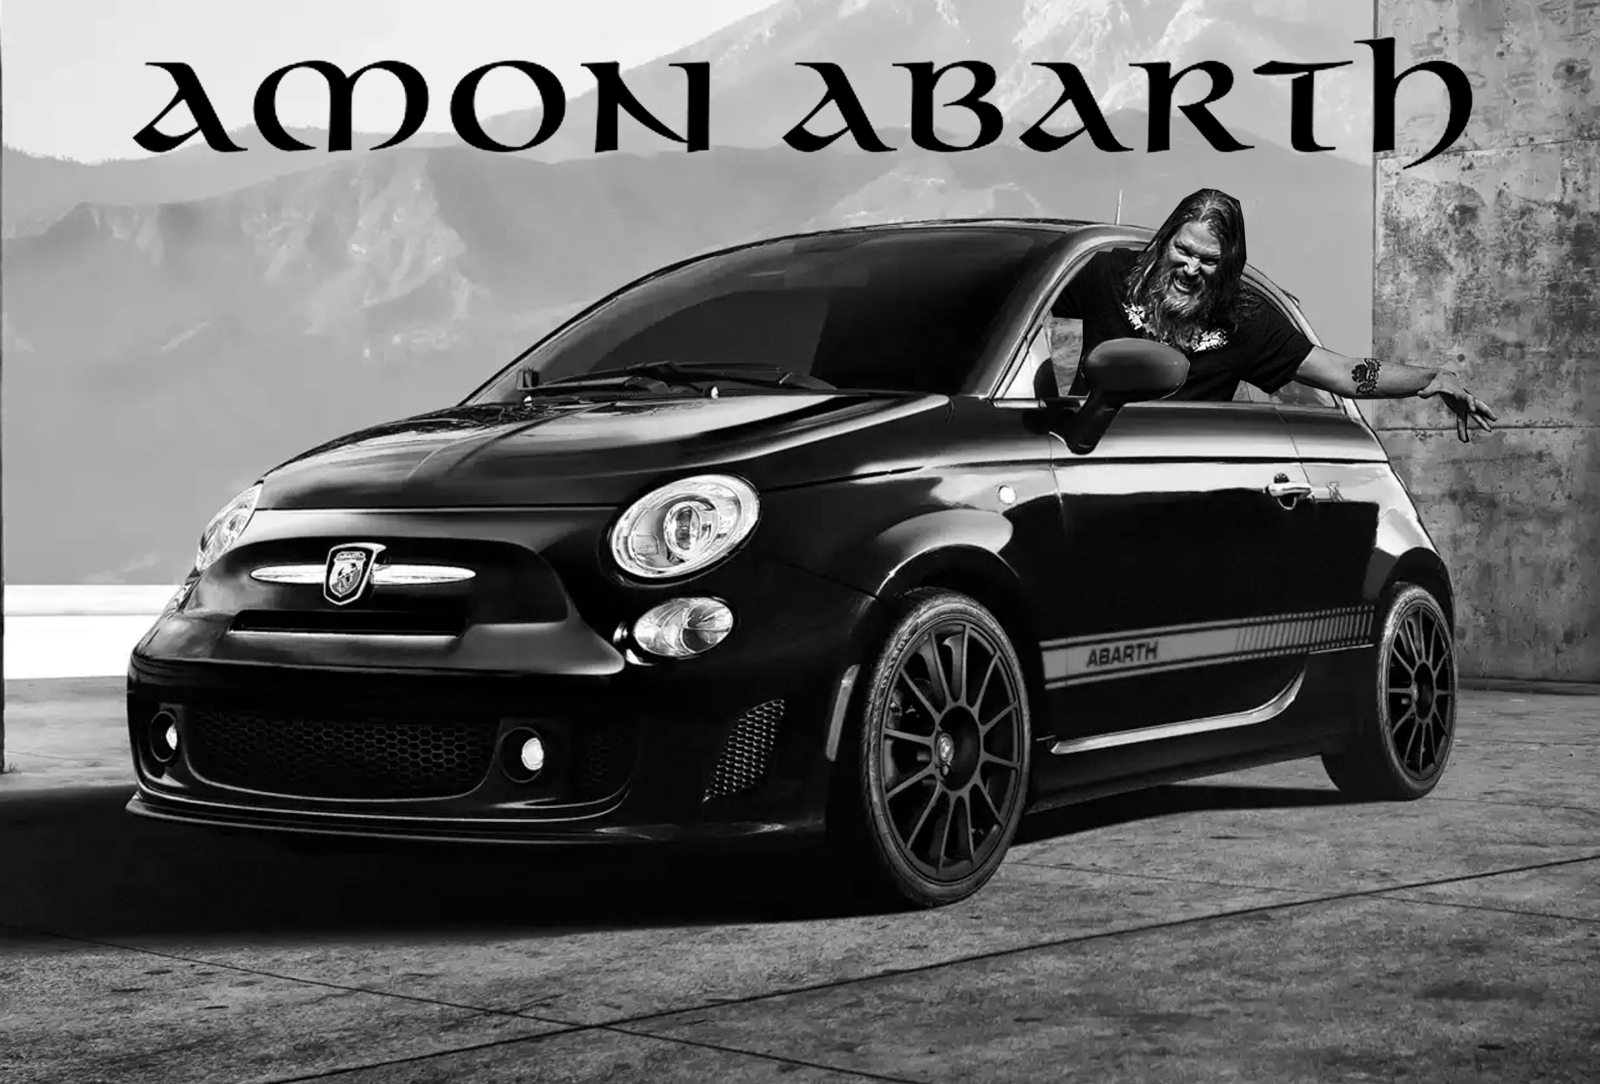 Illustration for article titled Oppo inform me: high mileage Abarth